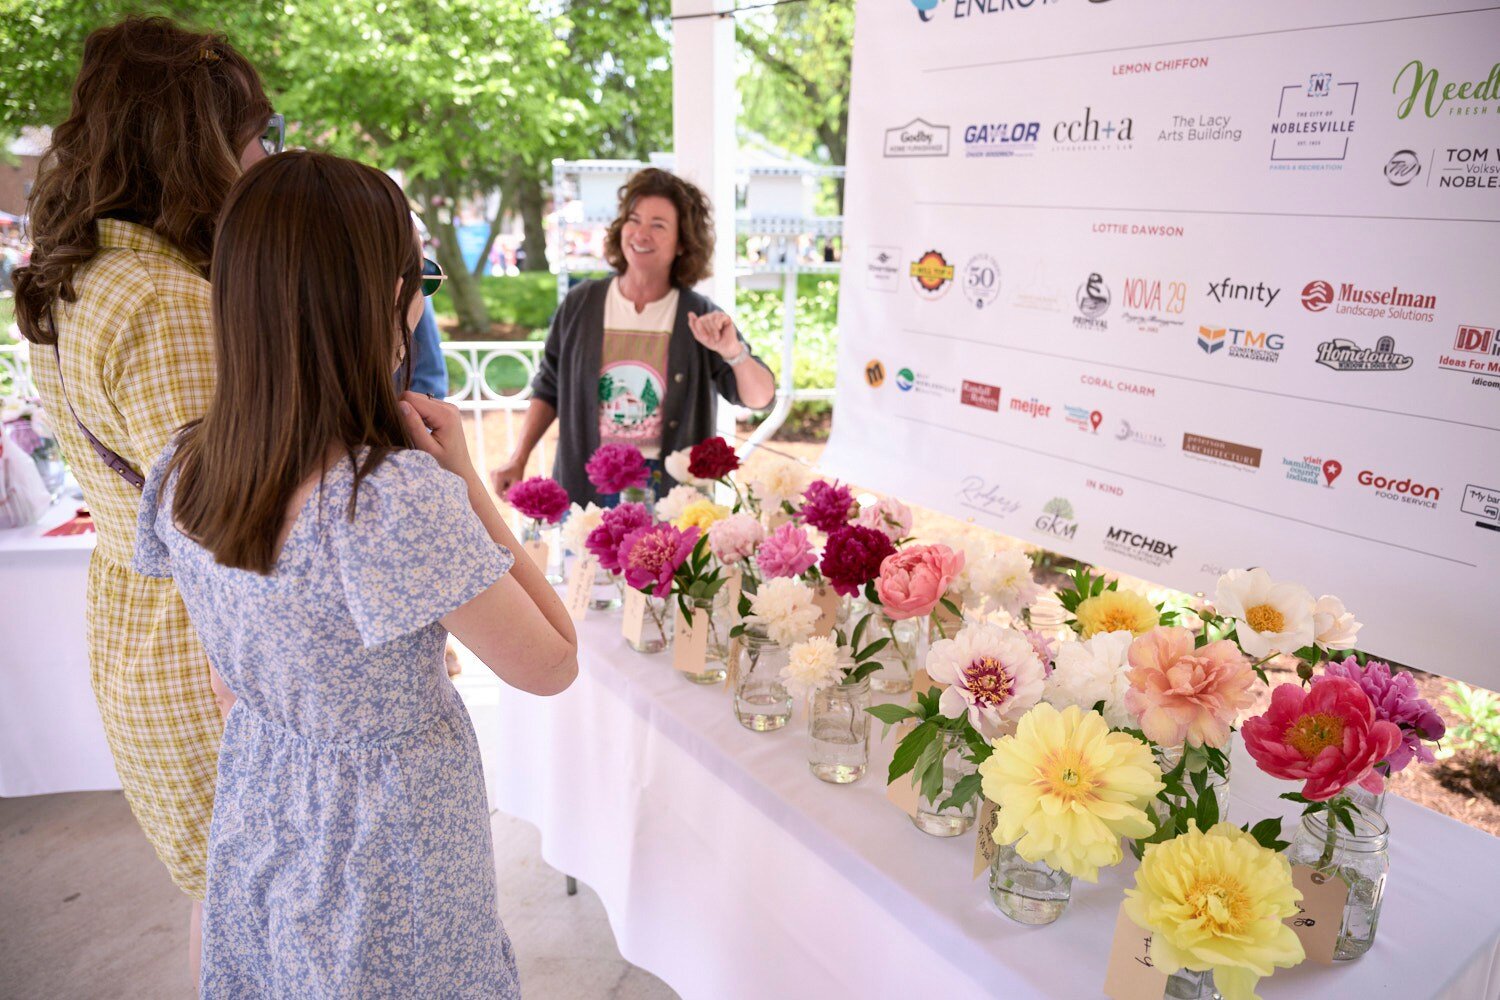 The Indiana Peony Festival, a celebration of our state flower and our vibrant community in downtown Noblesville, is supported by the spirit and dedication of volunteers like you! As a non-profit organization, we lean on the support and enthusiasm of 